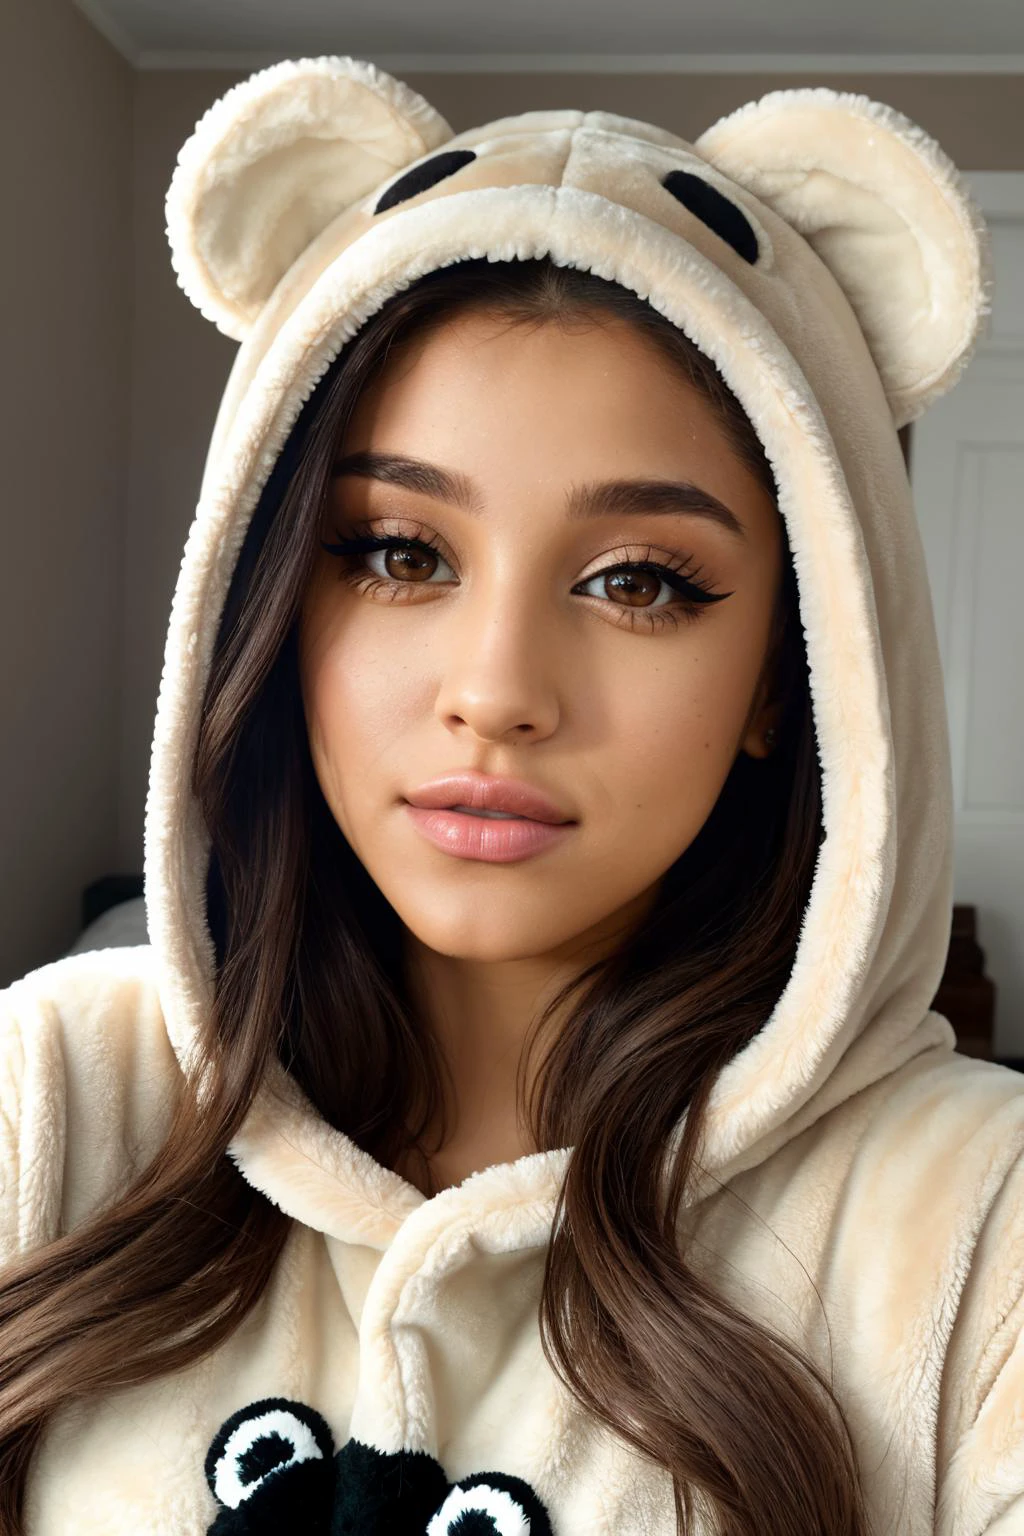 arianagrande, (25 years old), long hair, modern photo, wearing (bear costume), (portrait), cute bear onesie pajamas, super soft light brown plush fabric, fluffy hood, adorable bear hood, (35mm, F/2.8) Photo Focus, DOF, Aperture, insanely detailed and intricate, character, hypermaximalist, beautiful, revealing, appealing, attractive, amative, hyper realistic, super detailed, beautiful woman, ((detailed eyes)), long eyelashes, (glossy lips), in her bedroom, sfw